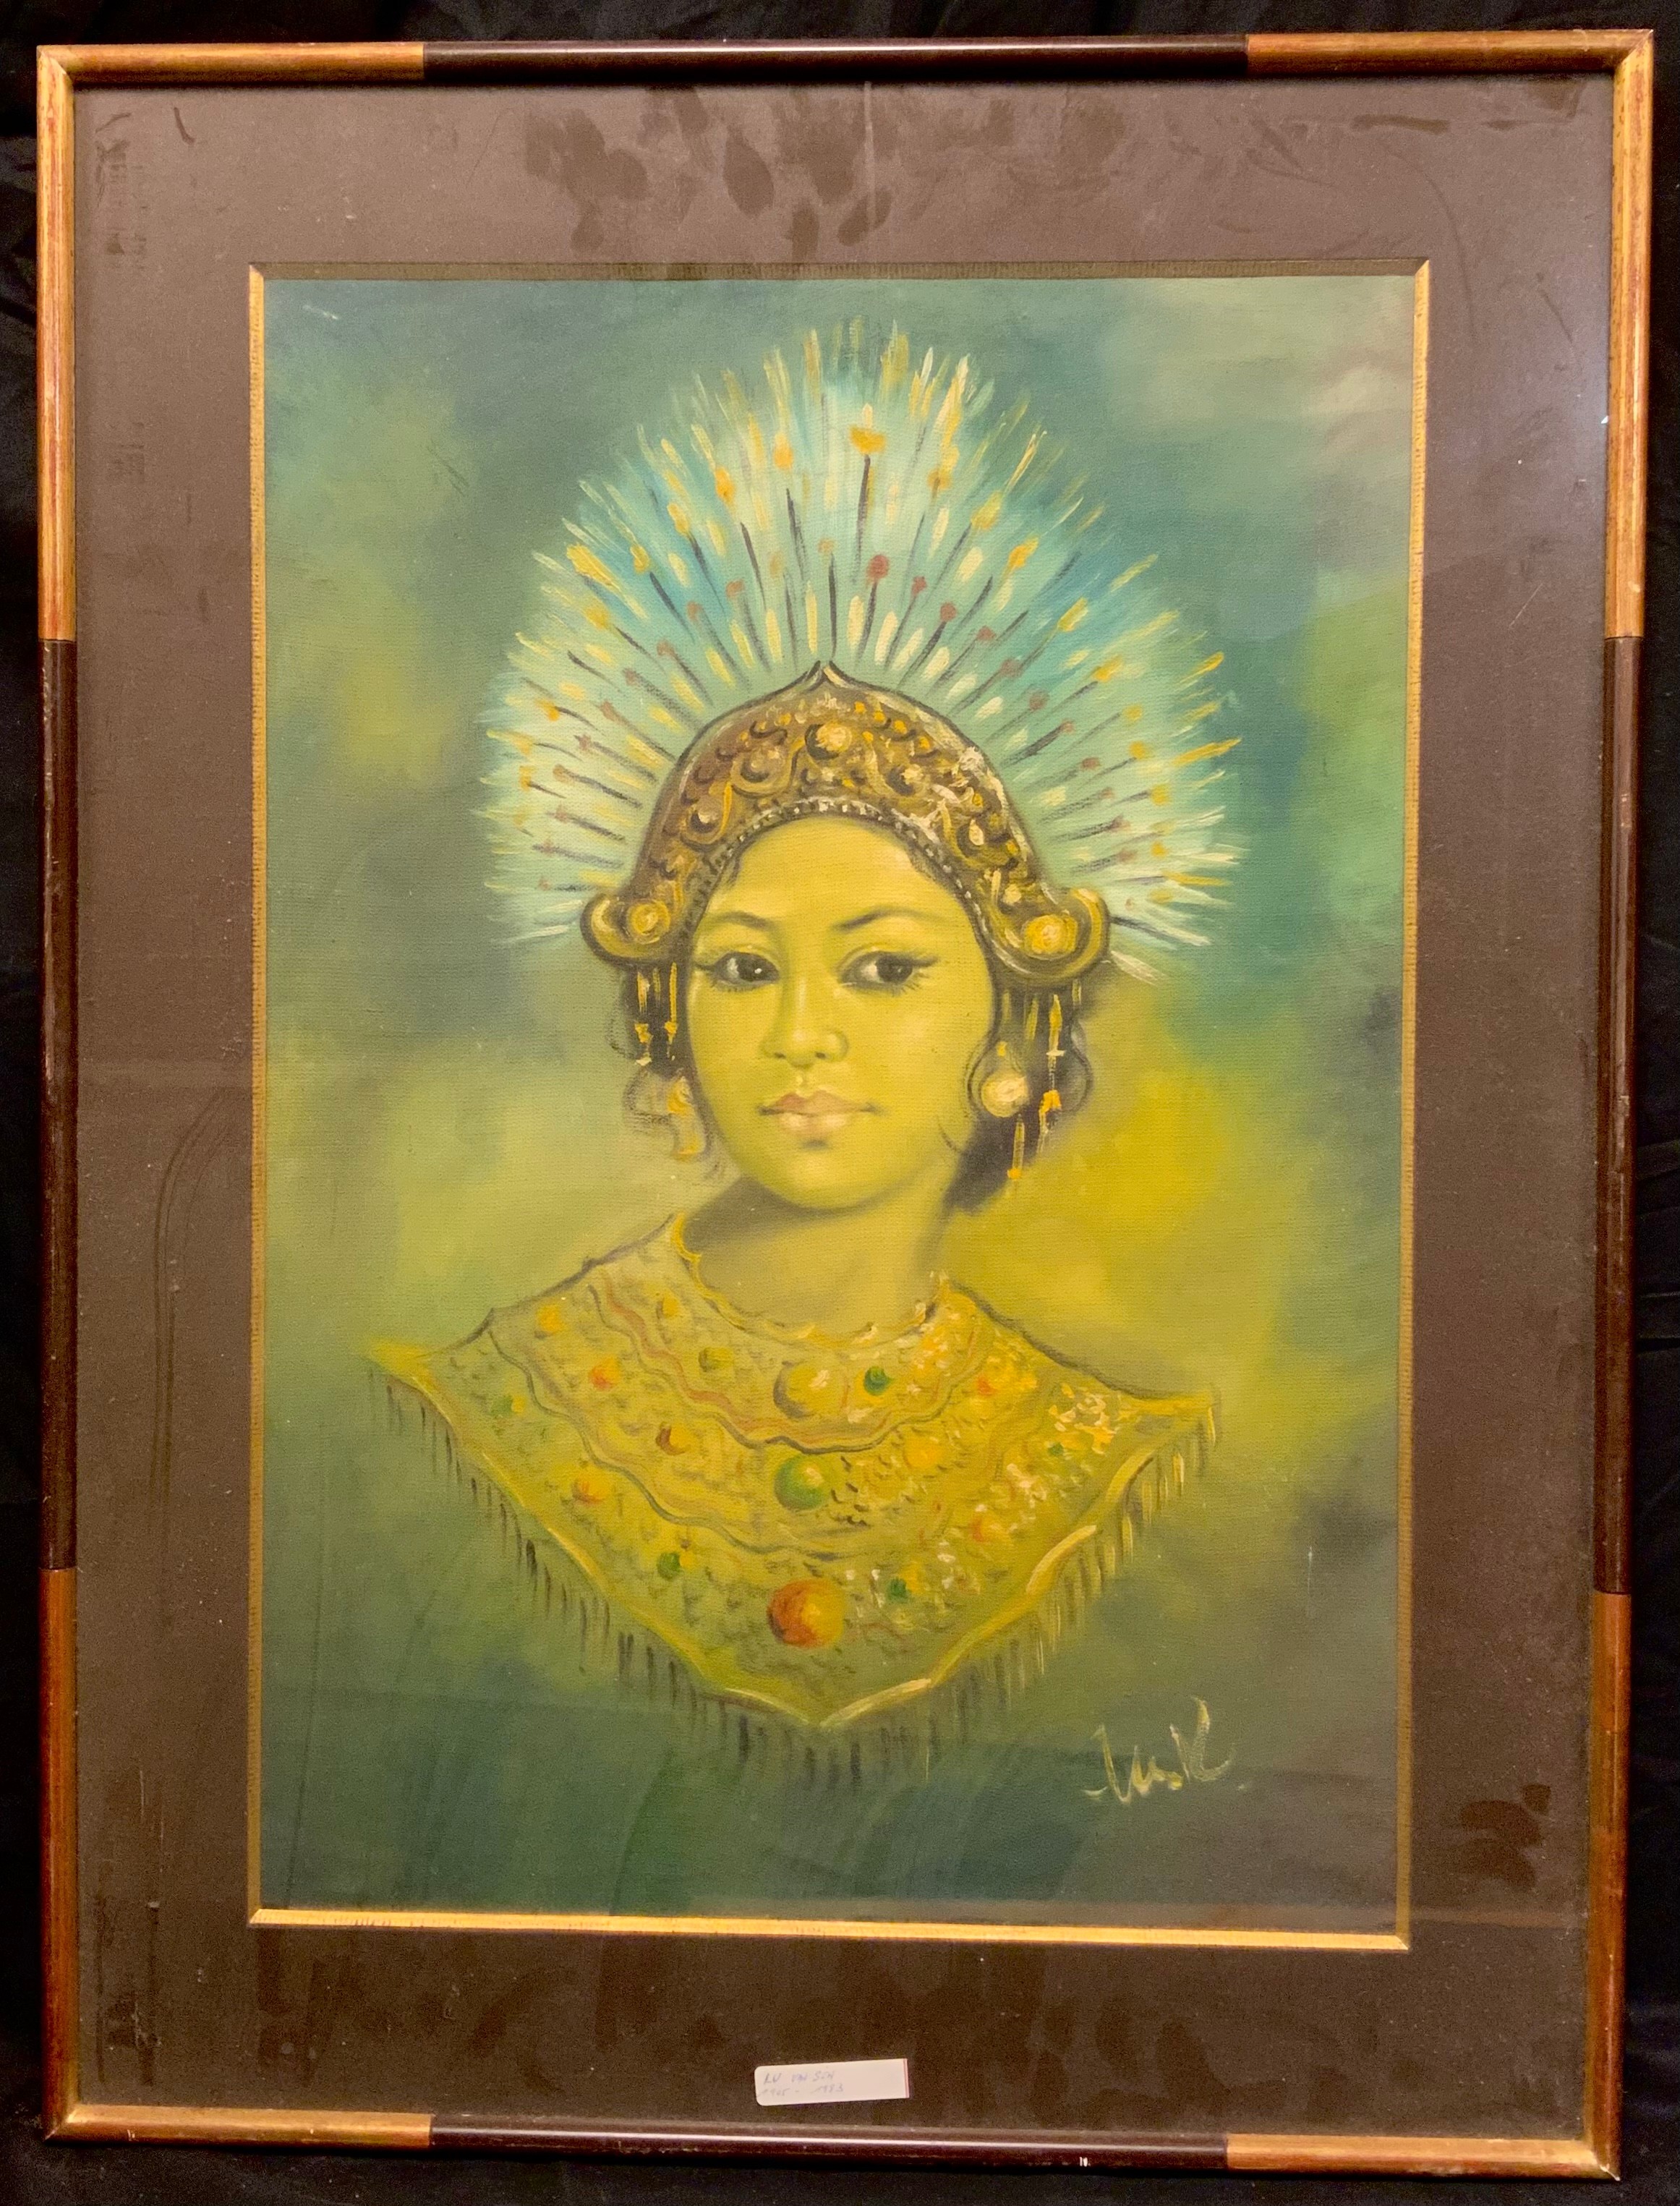 Follower of Vladimir Tretchikoff, Vietnamese Lady, indistinctly signed, label with attribution for